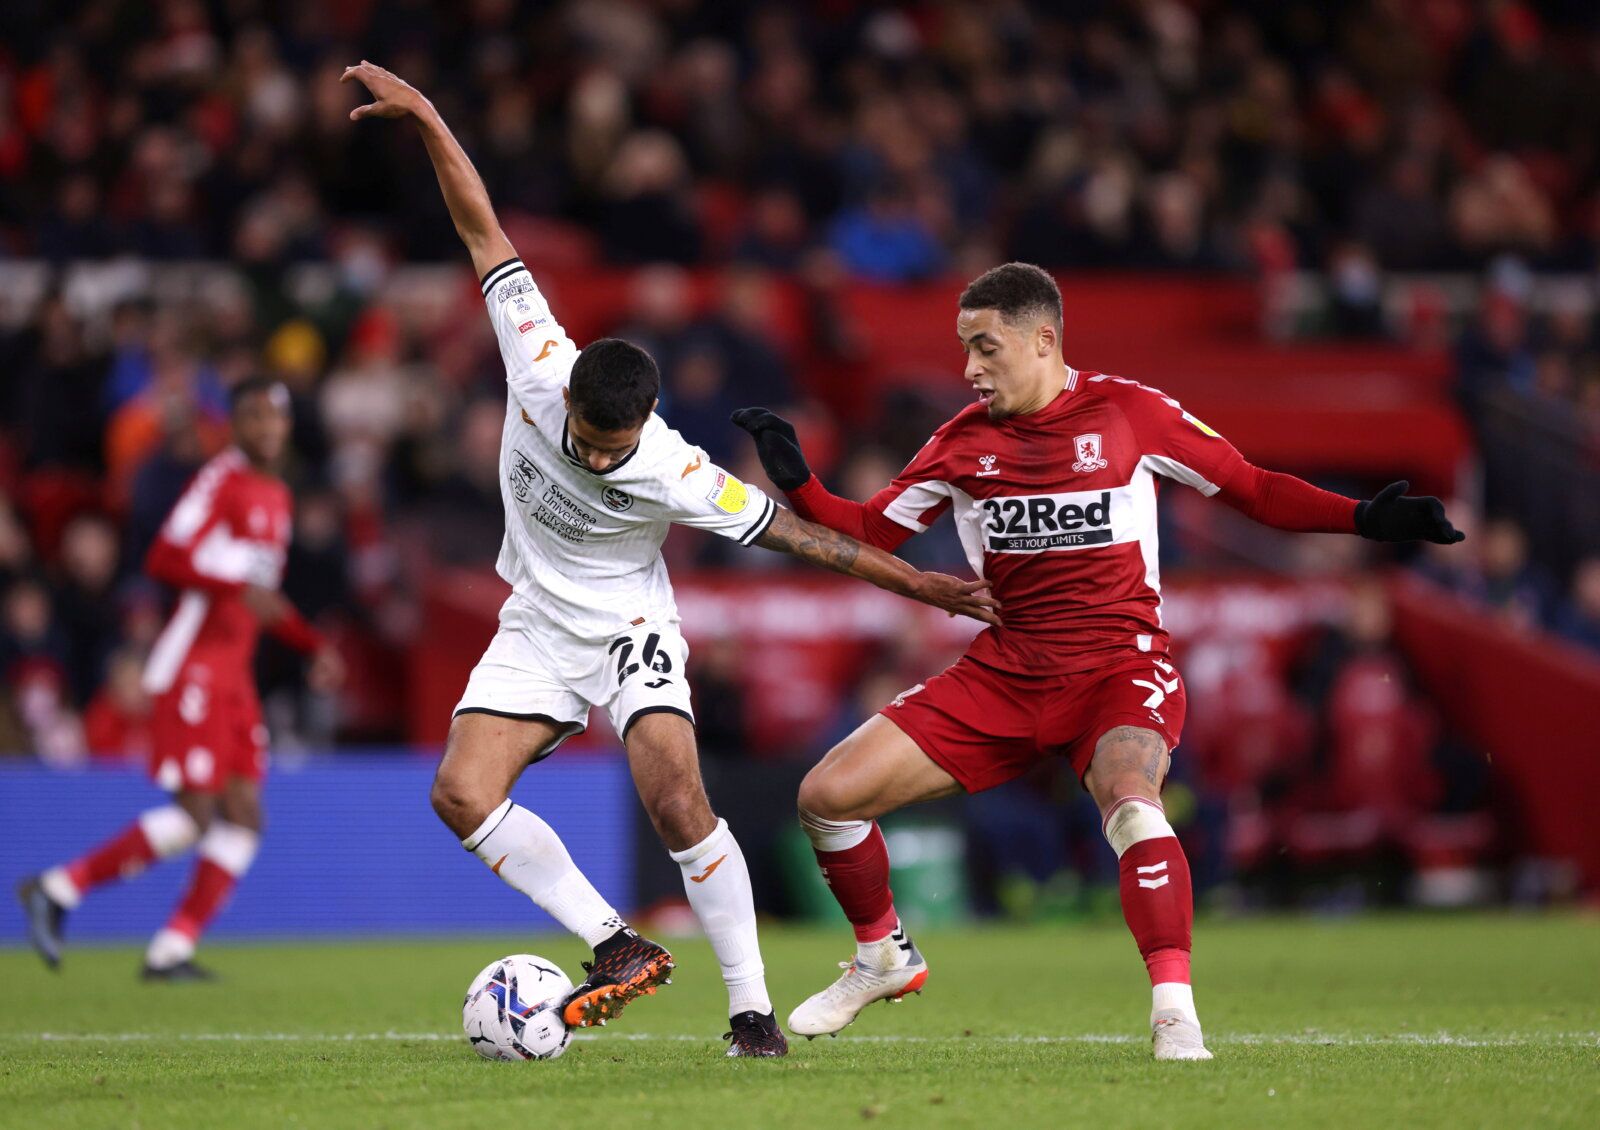 Soccer Football - Middlesbrough v Swansea City - Riverside Stadium, Middlesbrough, Britain - December 4, 2021  Swansea City's Kyle Naughton in action with Middlesbrough's Marcus Tavernier  Action Images/John Clifton  EDITORIAL USE ONLY. No use with unauthorized audio, video, data, fixture lists, club/league logos or 